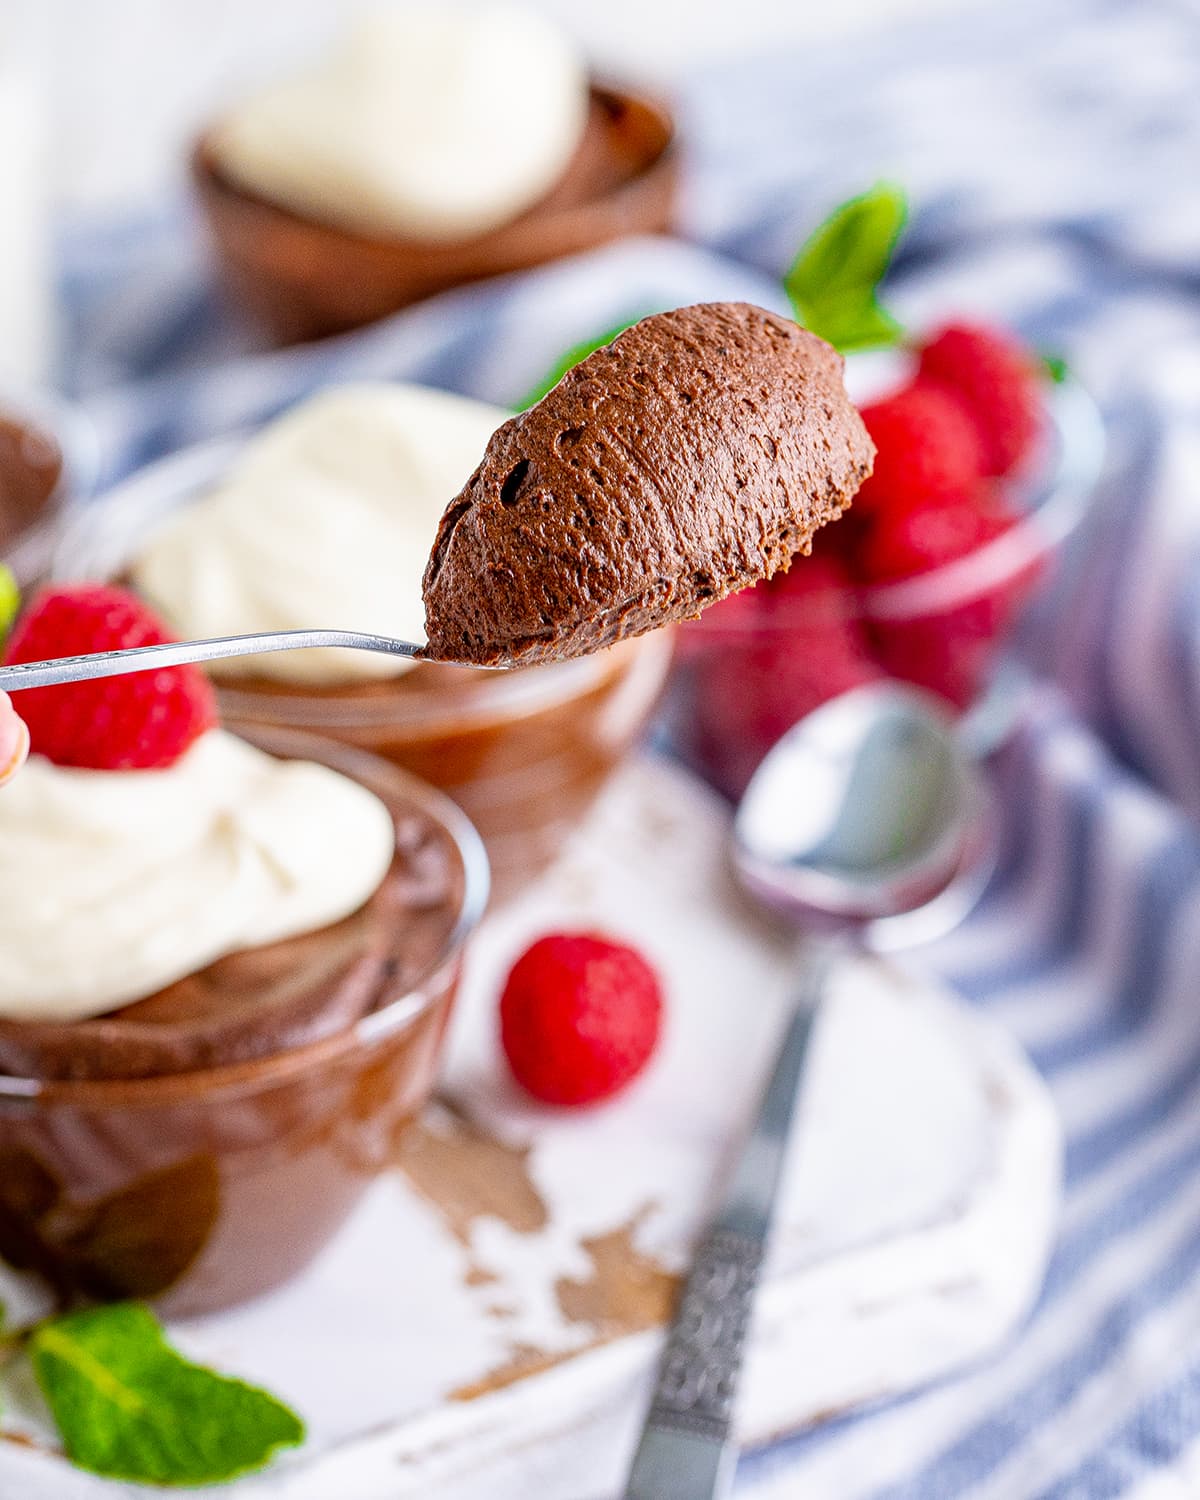 A spoonful of chocolate mousse.